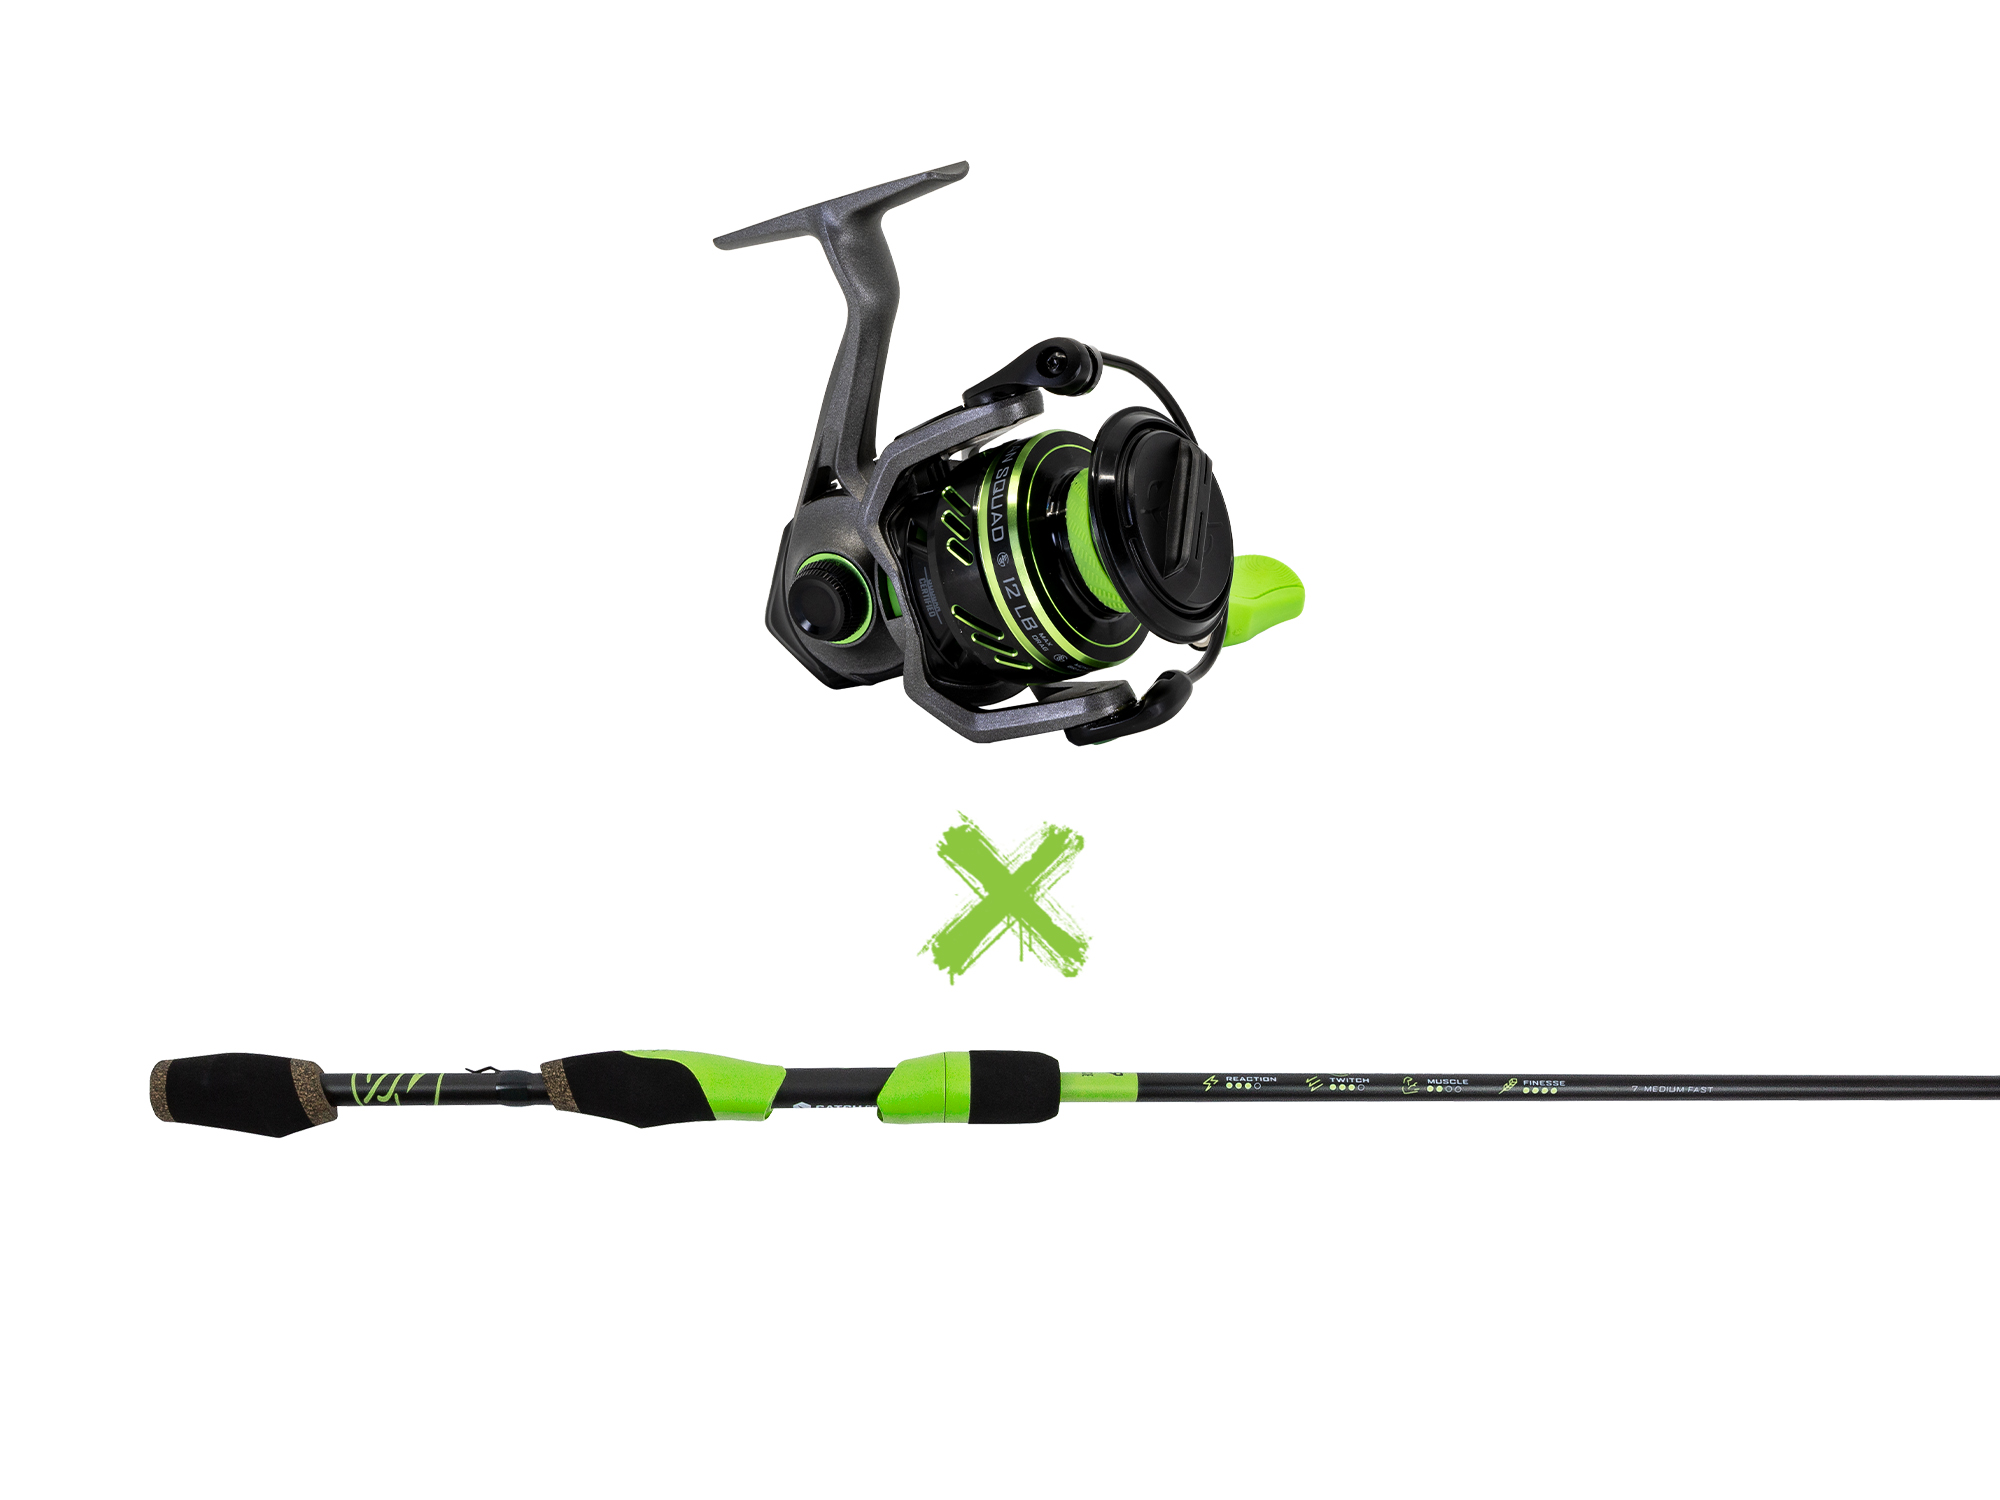 The Best Ultralight Spinning Reels  Save Money & Catch More Fish! 